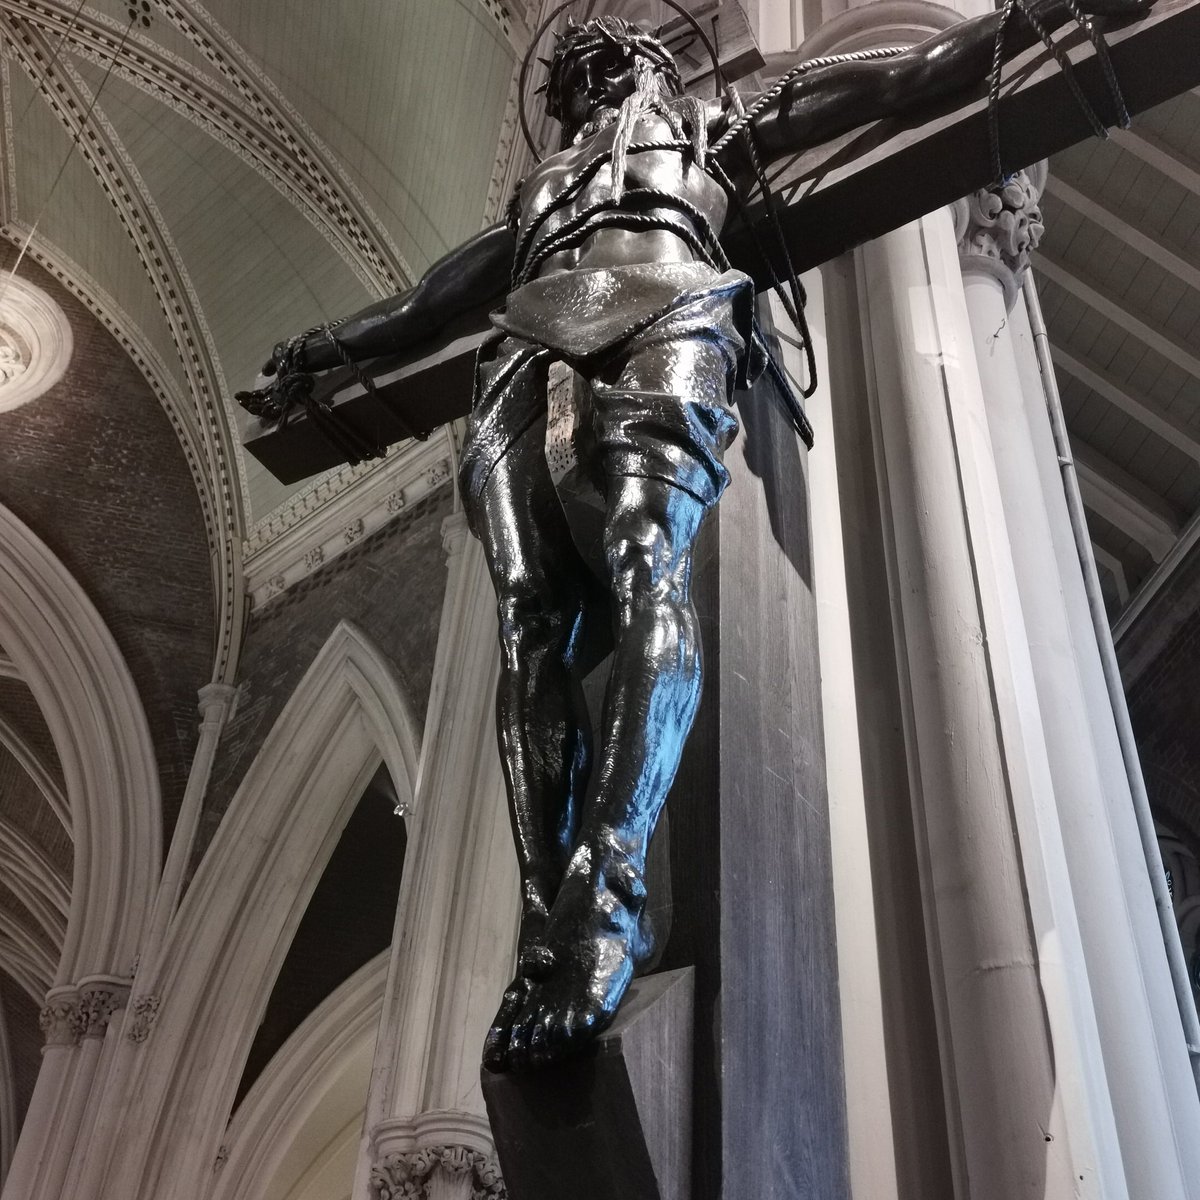 I am in church and have so many thoughts. First of all, all the statues are of buff men with ripped arms and bods including Jesus Christ on the cross.